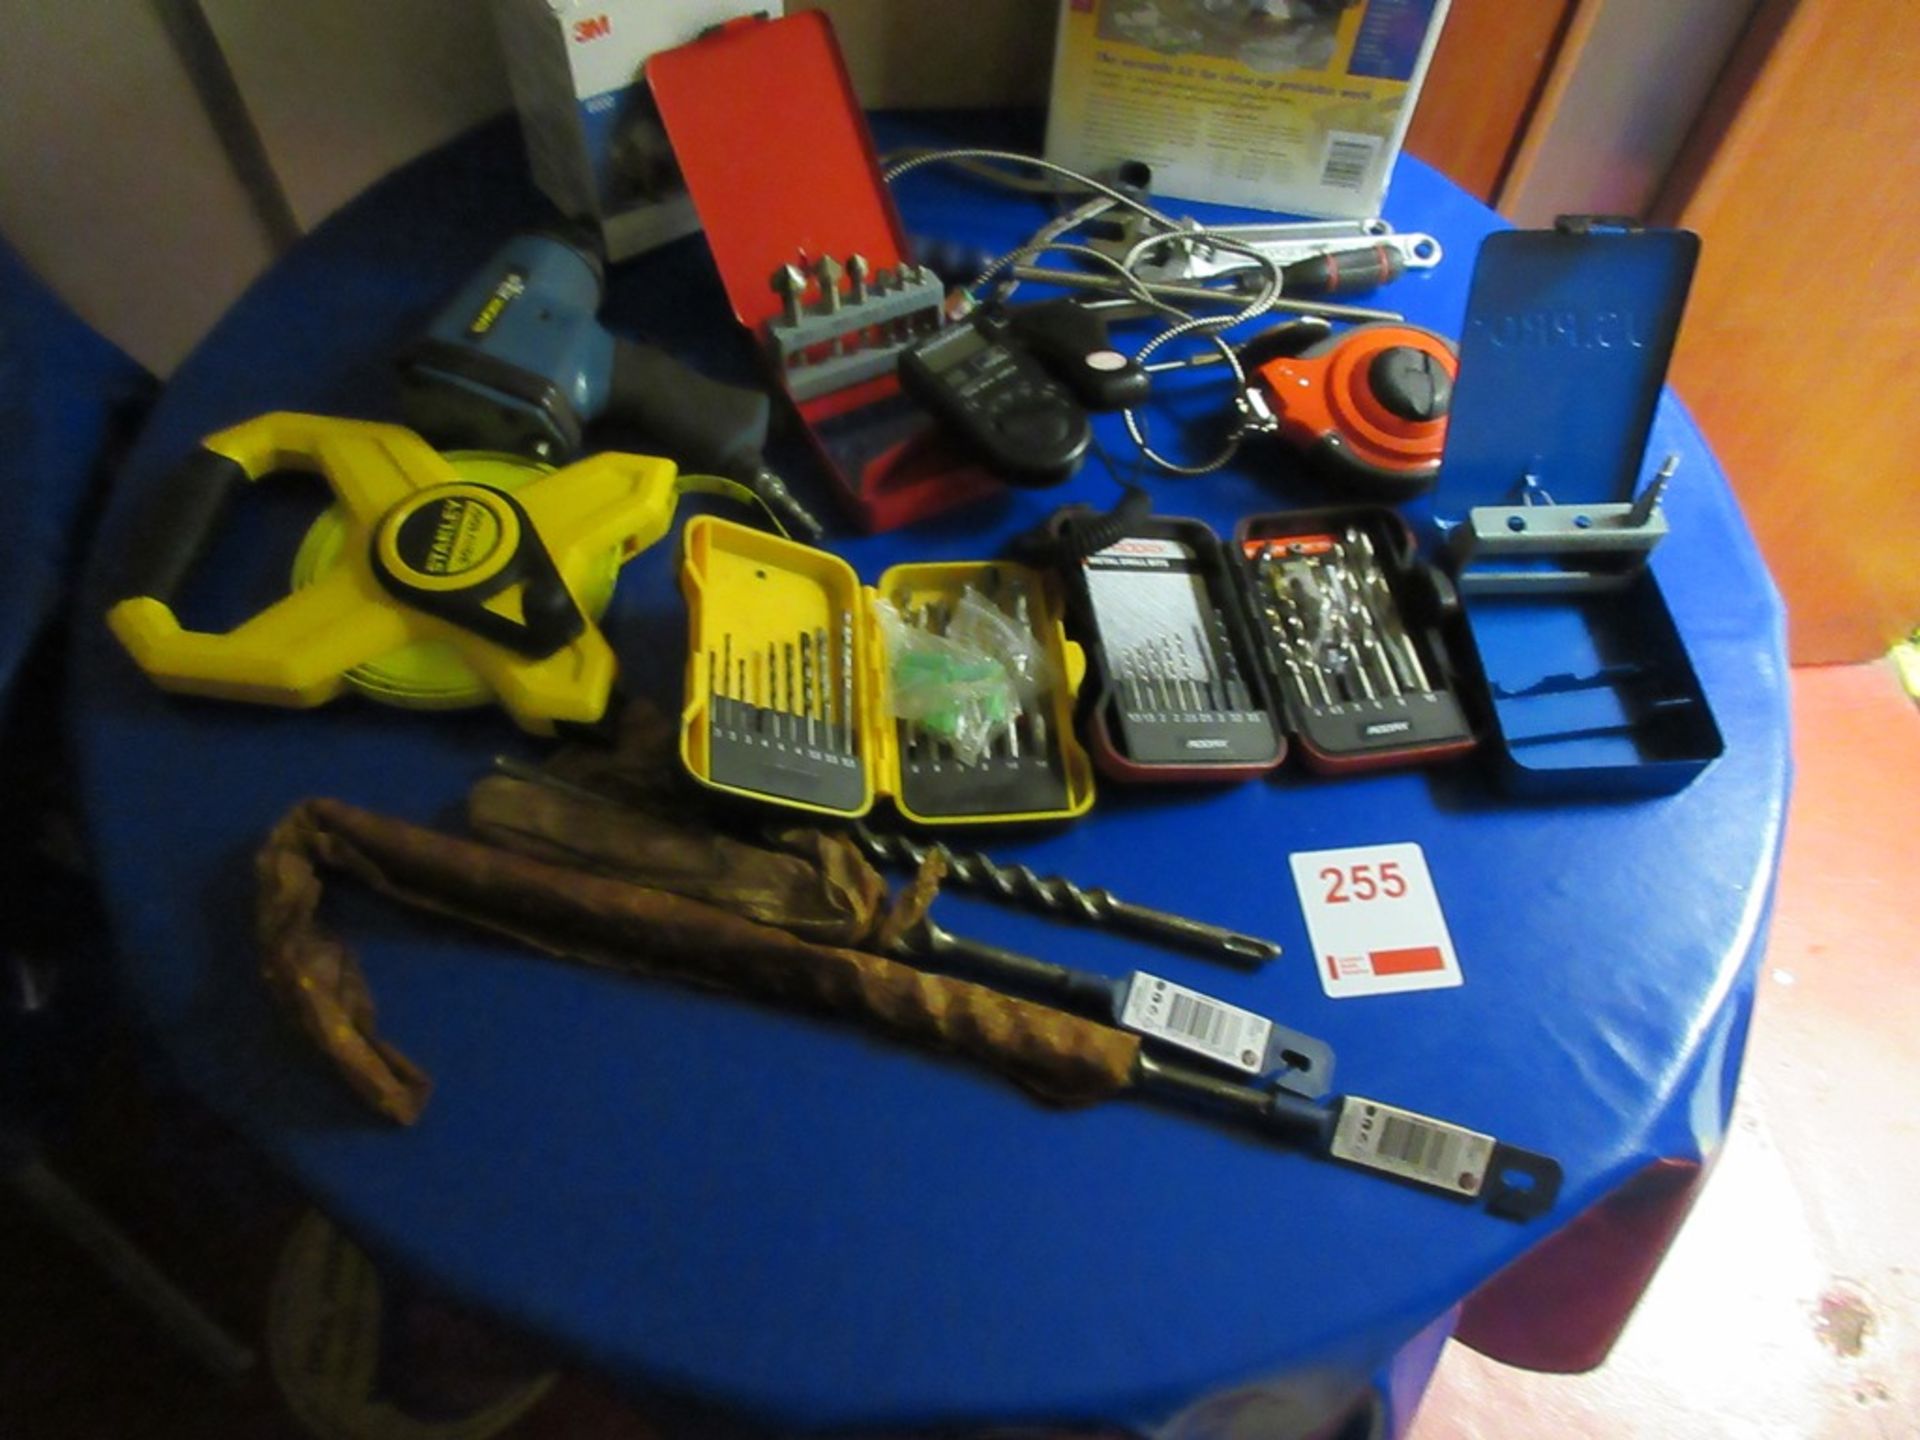 Miscellaneous lot including drill bits, tape measures, light meter, adjustable spanner, headband - Image 4 of 5